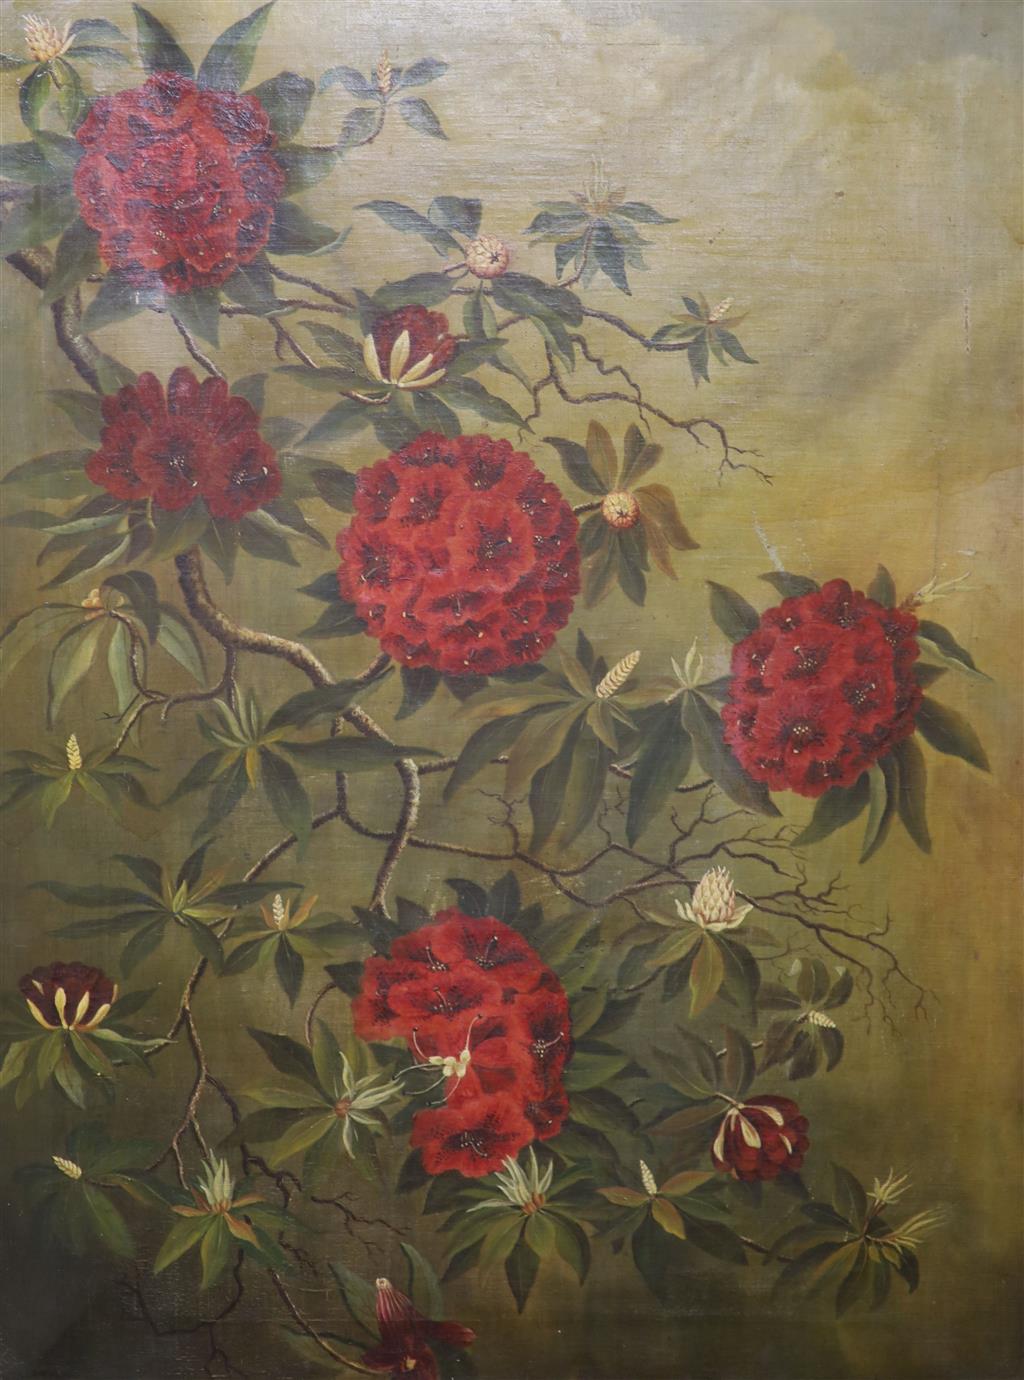 English School c.1900, oil on canvas, Study of Rhododendron blossom, indistinctly signed, 90 x 67cm